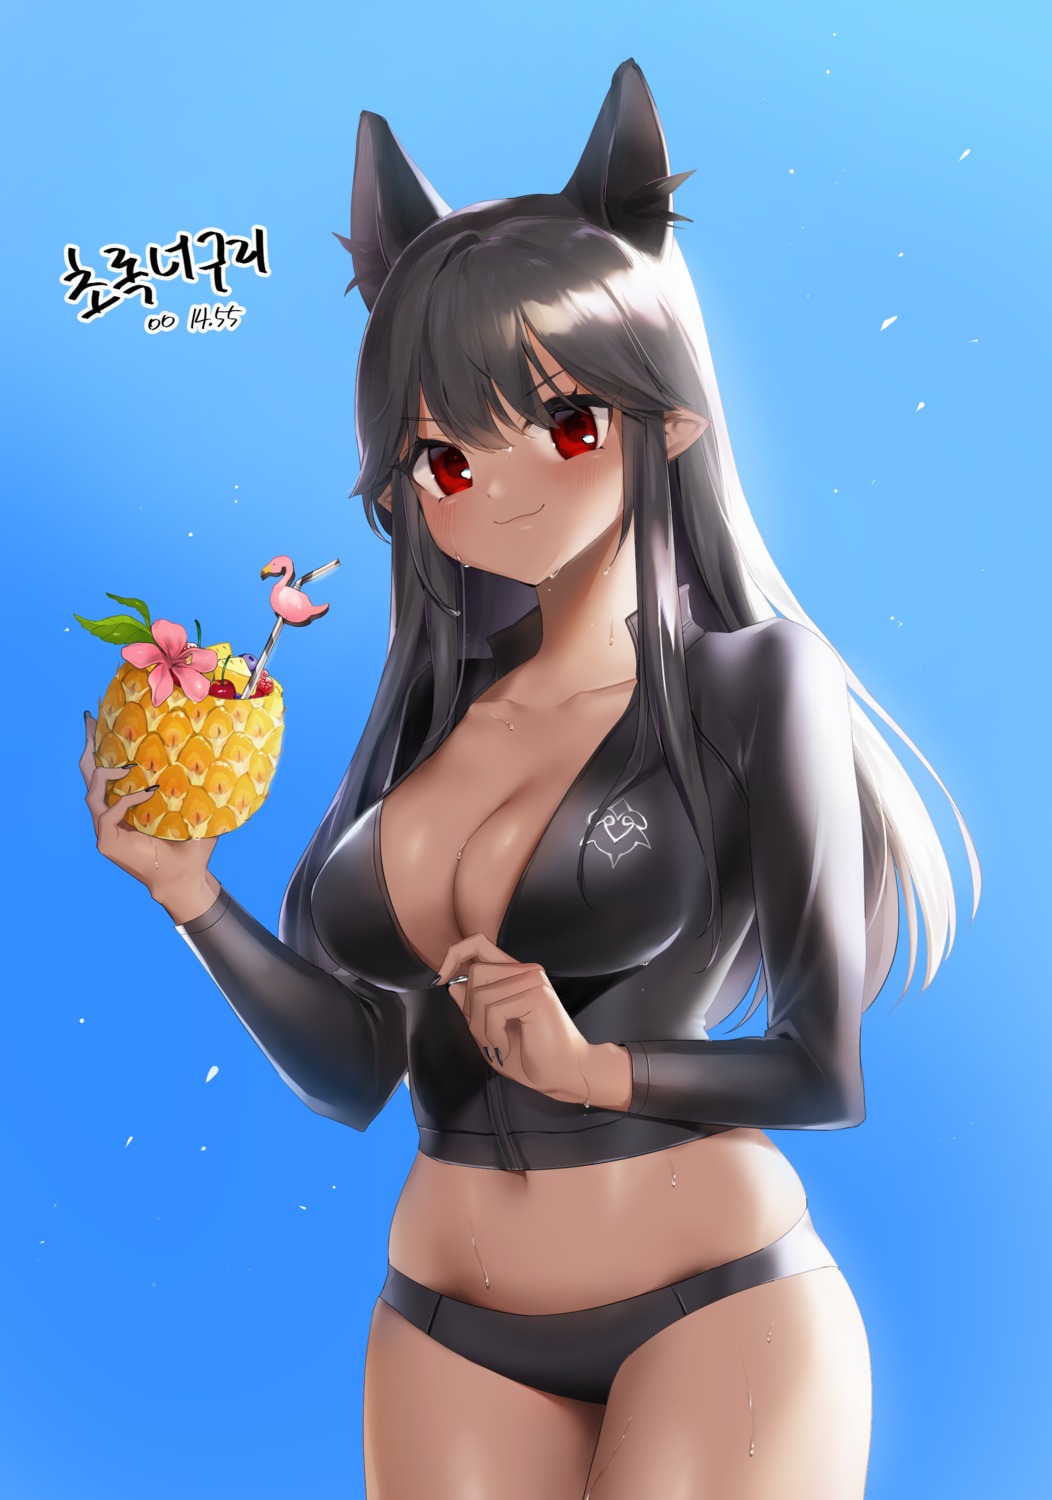 28mm animal_ears cleavage open_shirt pointy_ears swimsuits undressing